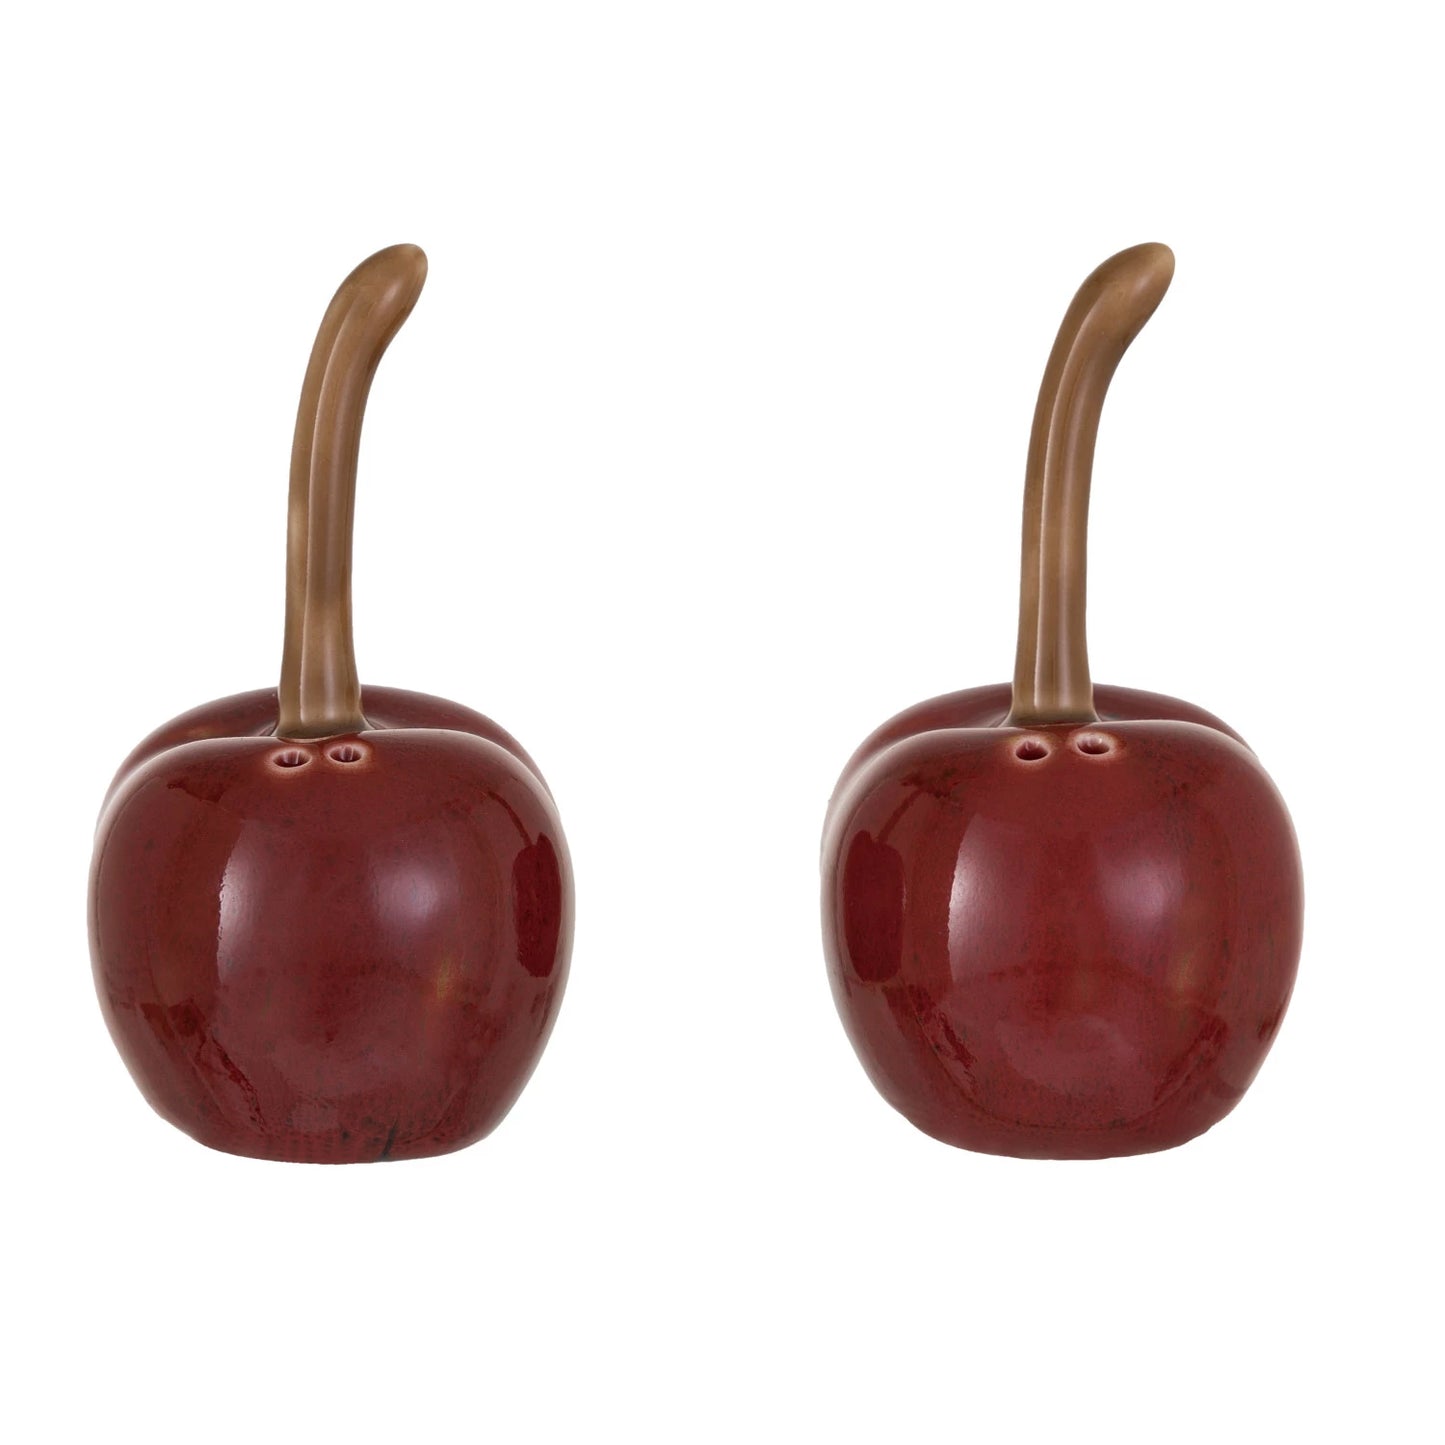 2 cherry shaped shakers with stems on a white background.